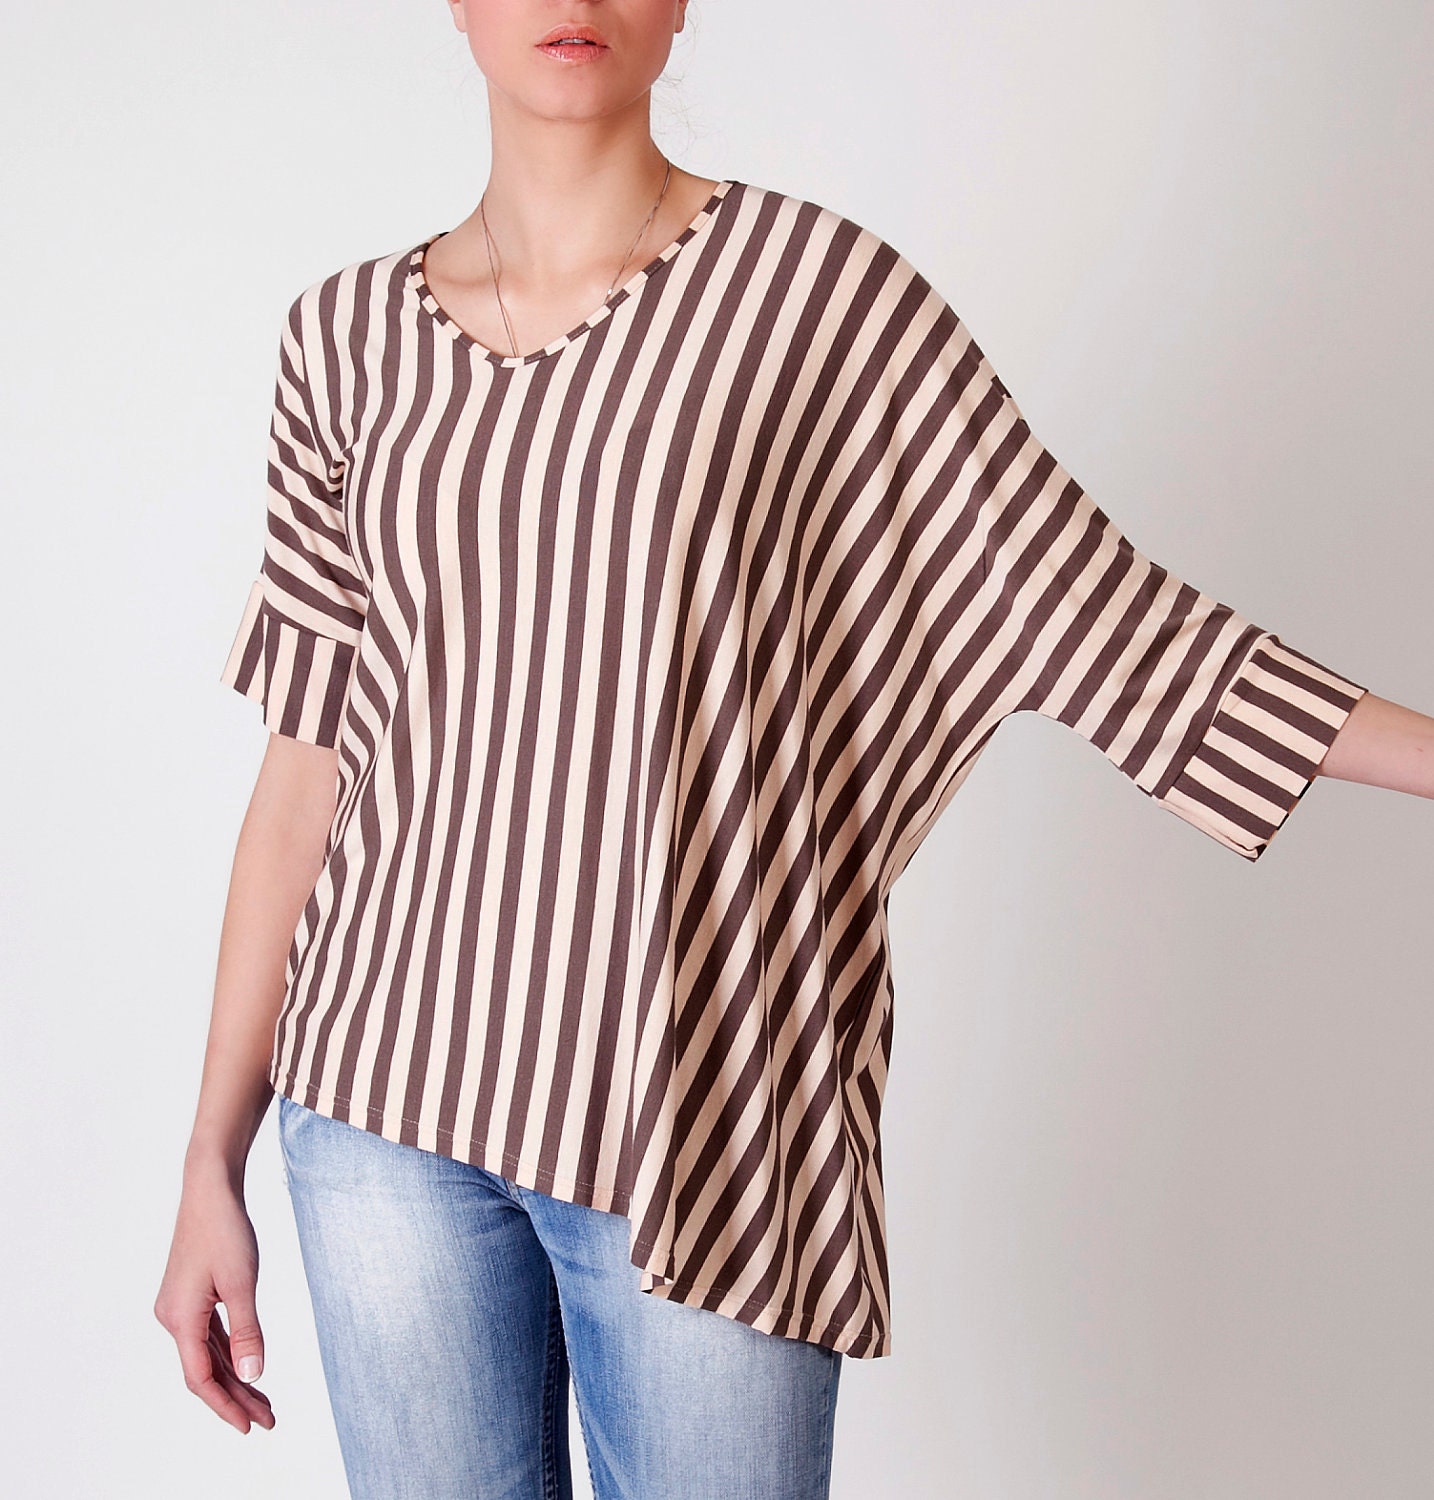 Striped blouse shirt sweater with oversized draped side in pastel pink cream & brown -ready to ship-